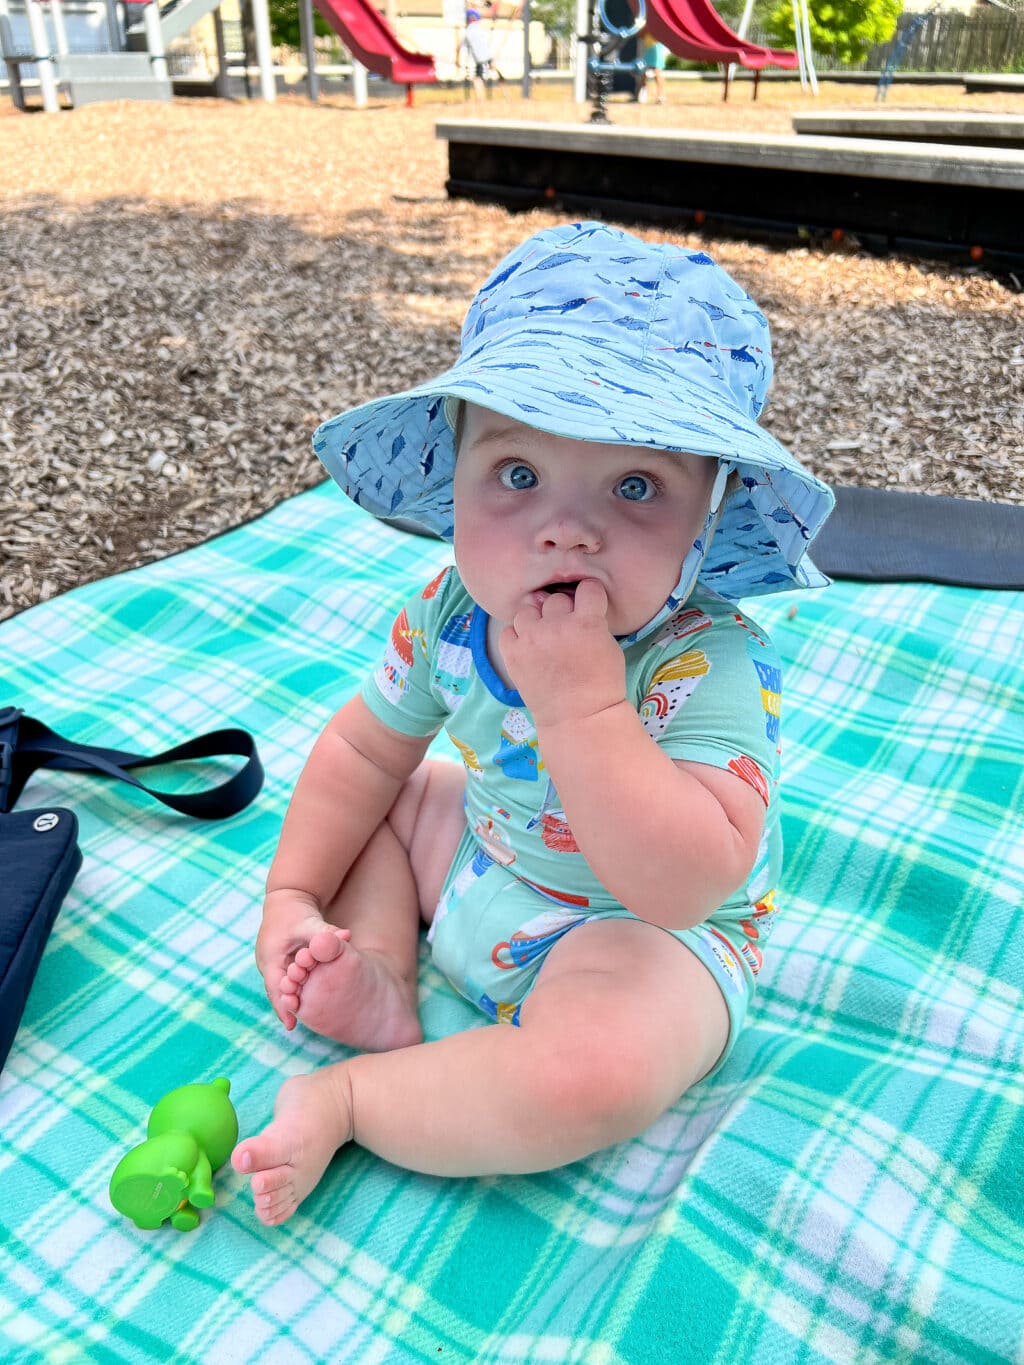 ellis wearing his hat at the park